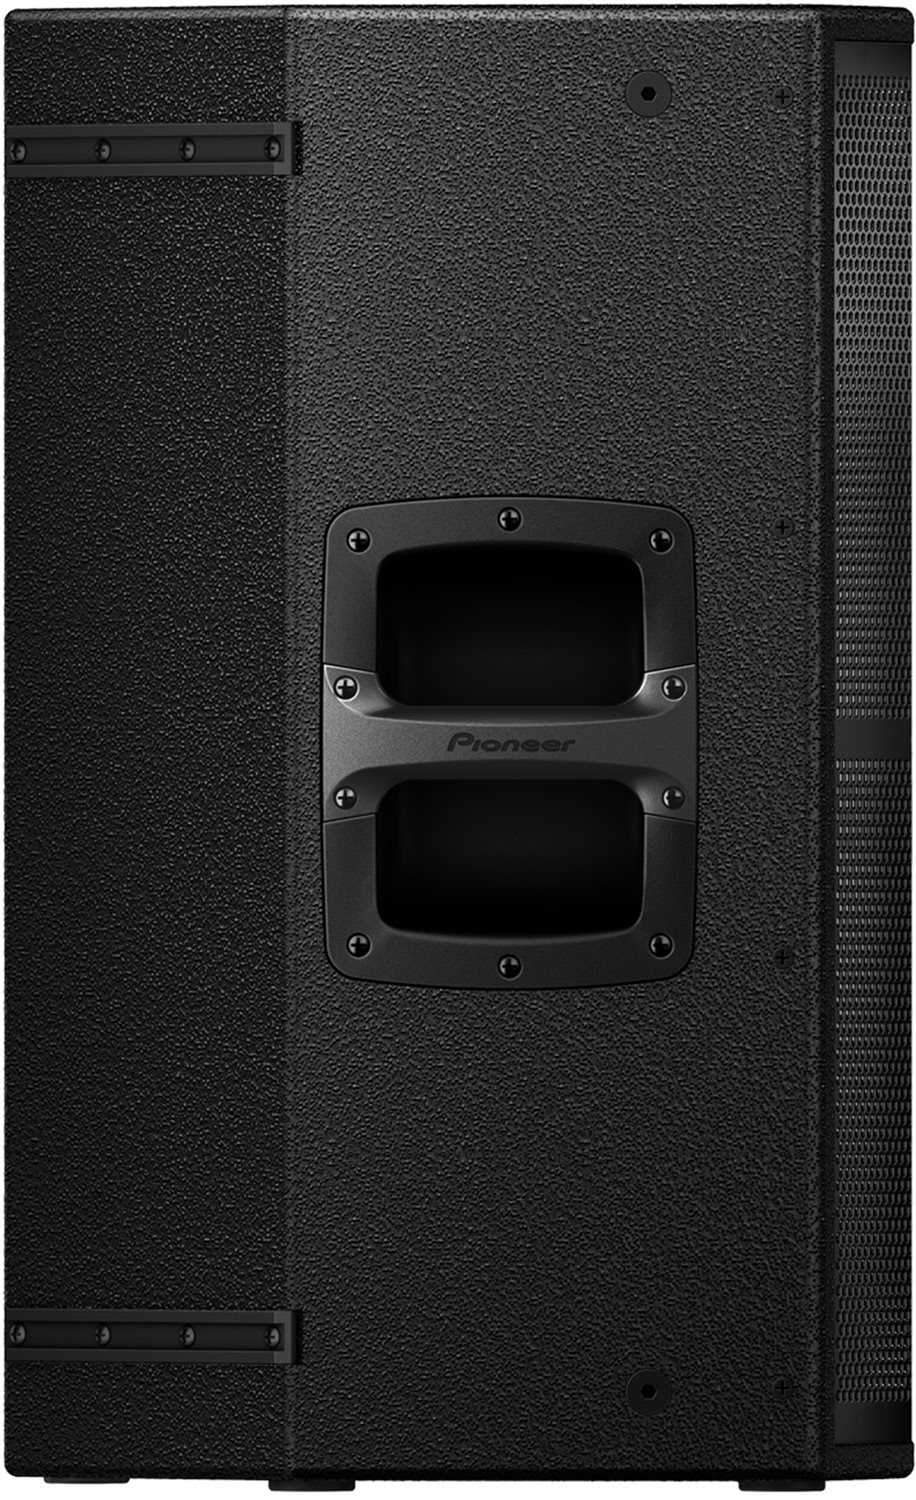 Pioneer XPRS15 15-Inch 2-Way Powered Speaker - PSSL ProSound and Stage Lighting